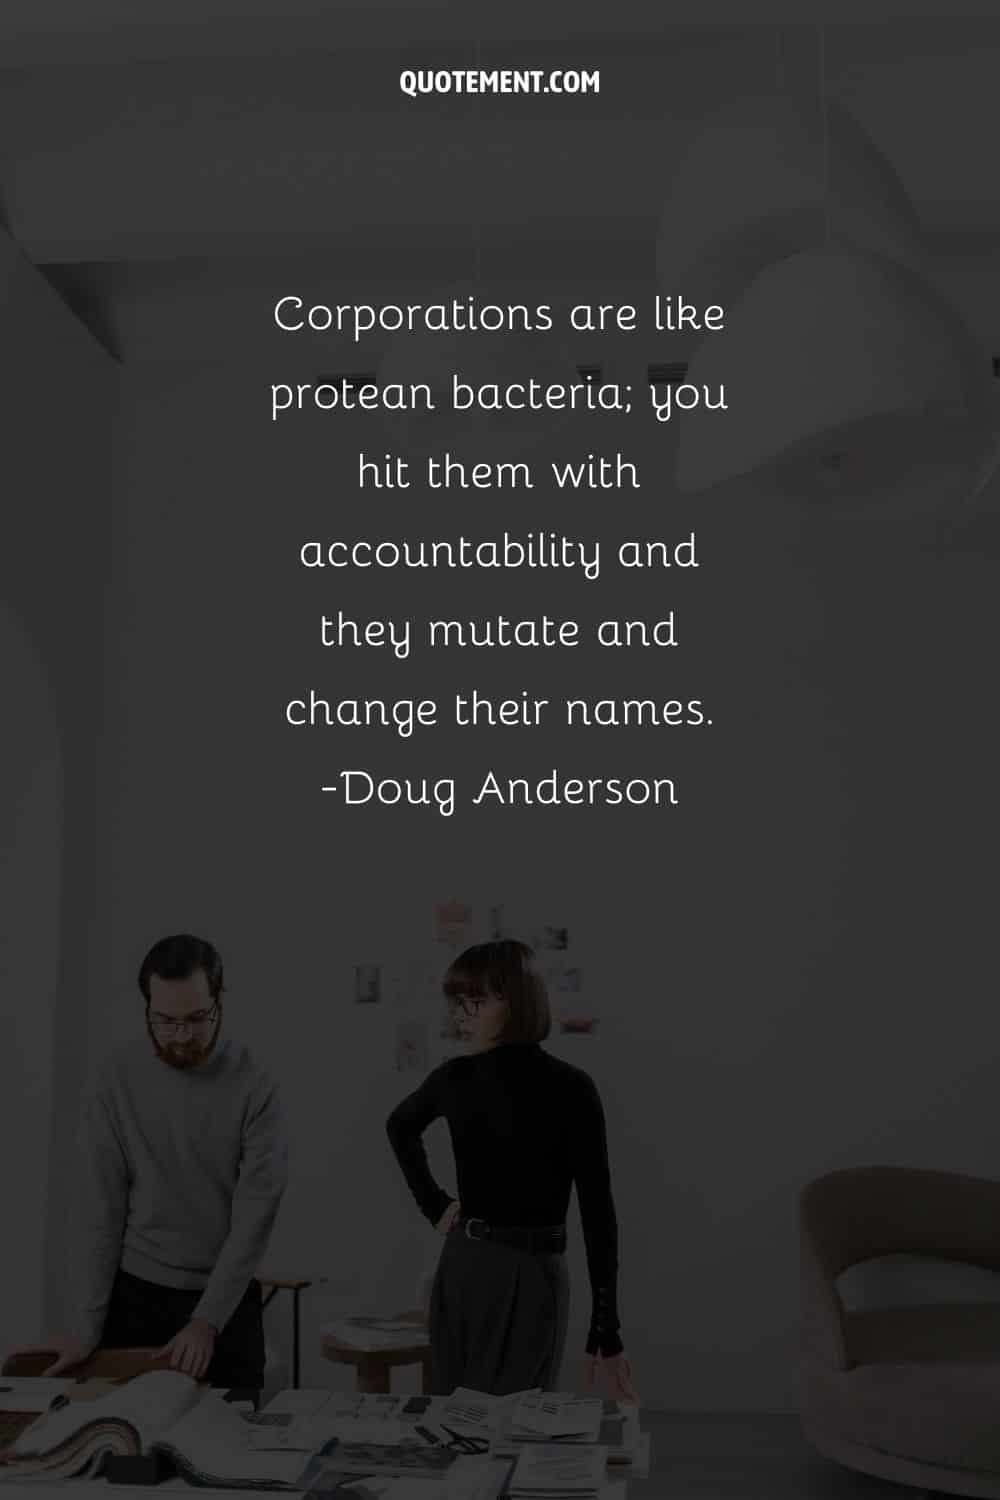 Corporations are like protean bacteria; you hit them with accountability and they mutate and change their names